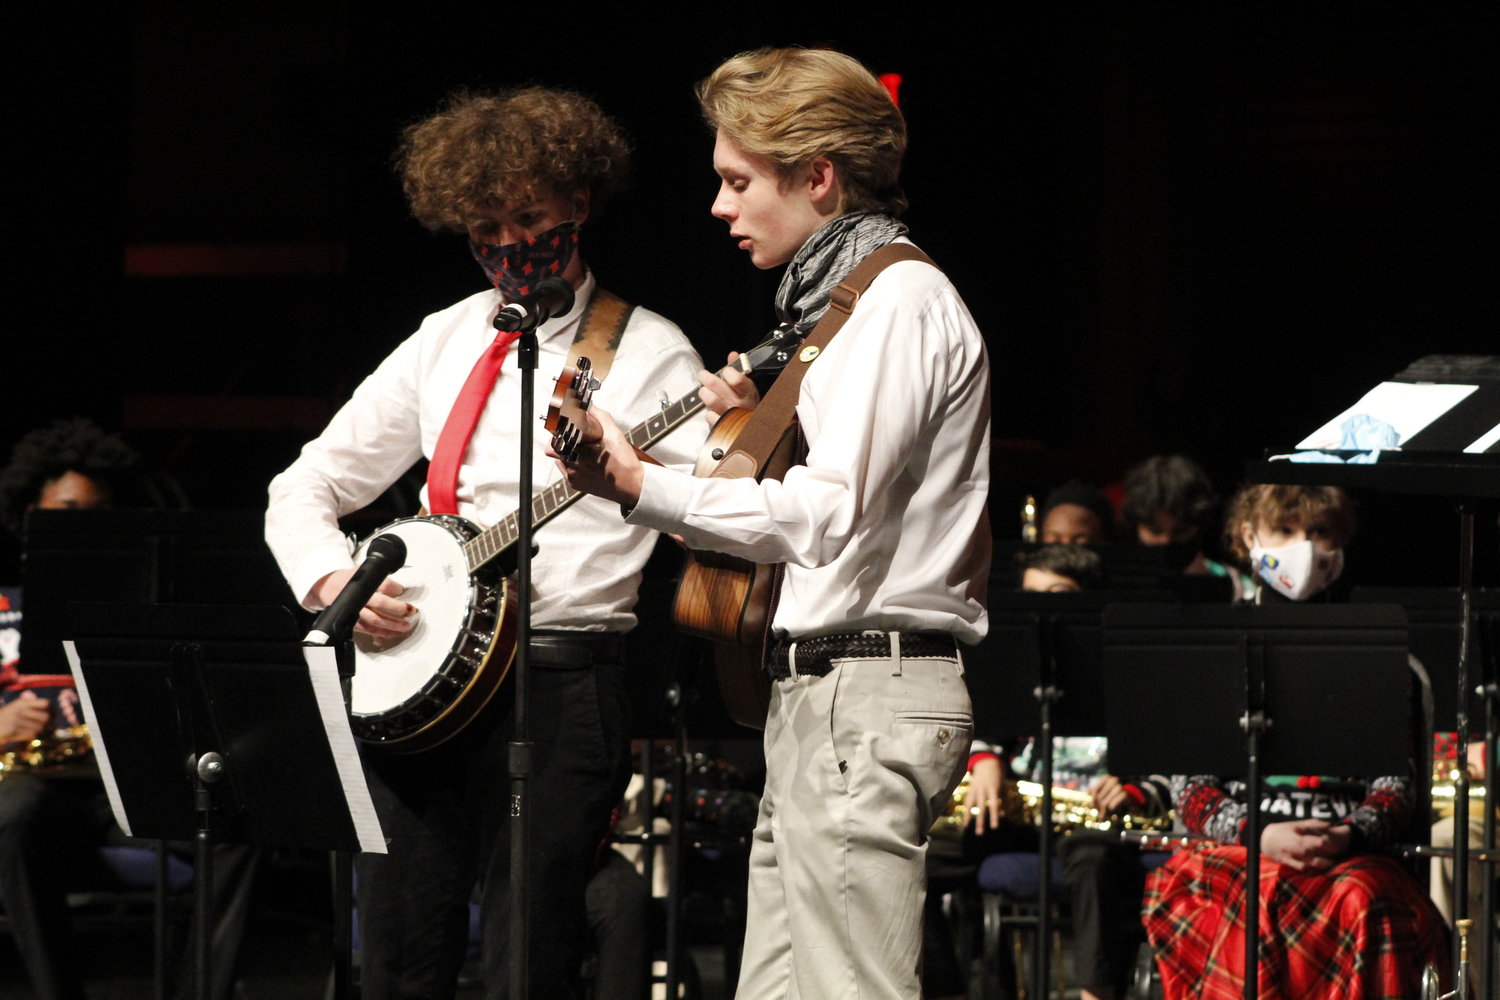 Elliot Stephen (left) and Abery Calvert (right) perform on stage during the 2020 virtual Gifts of the Season concert.